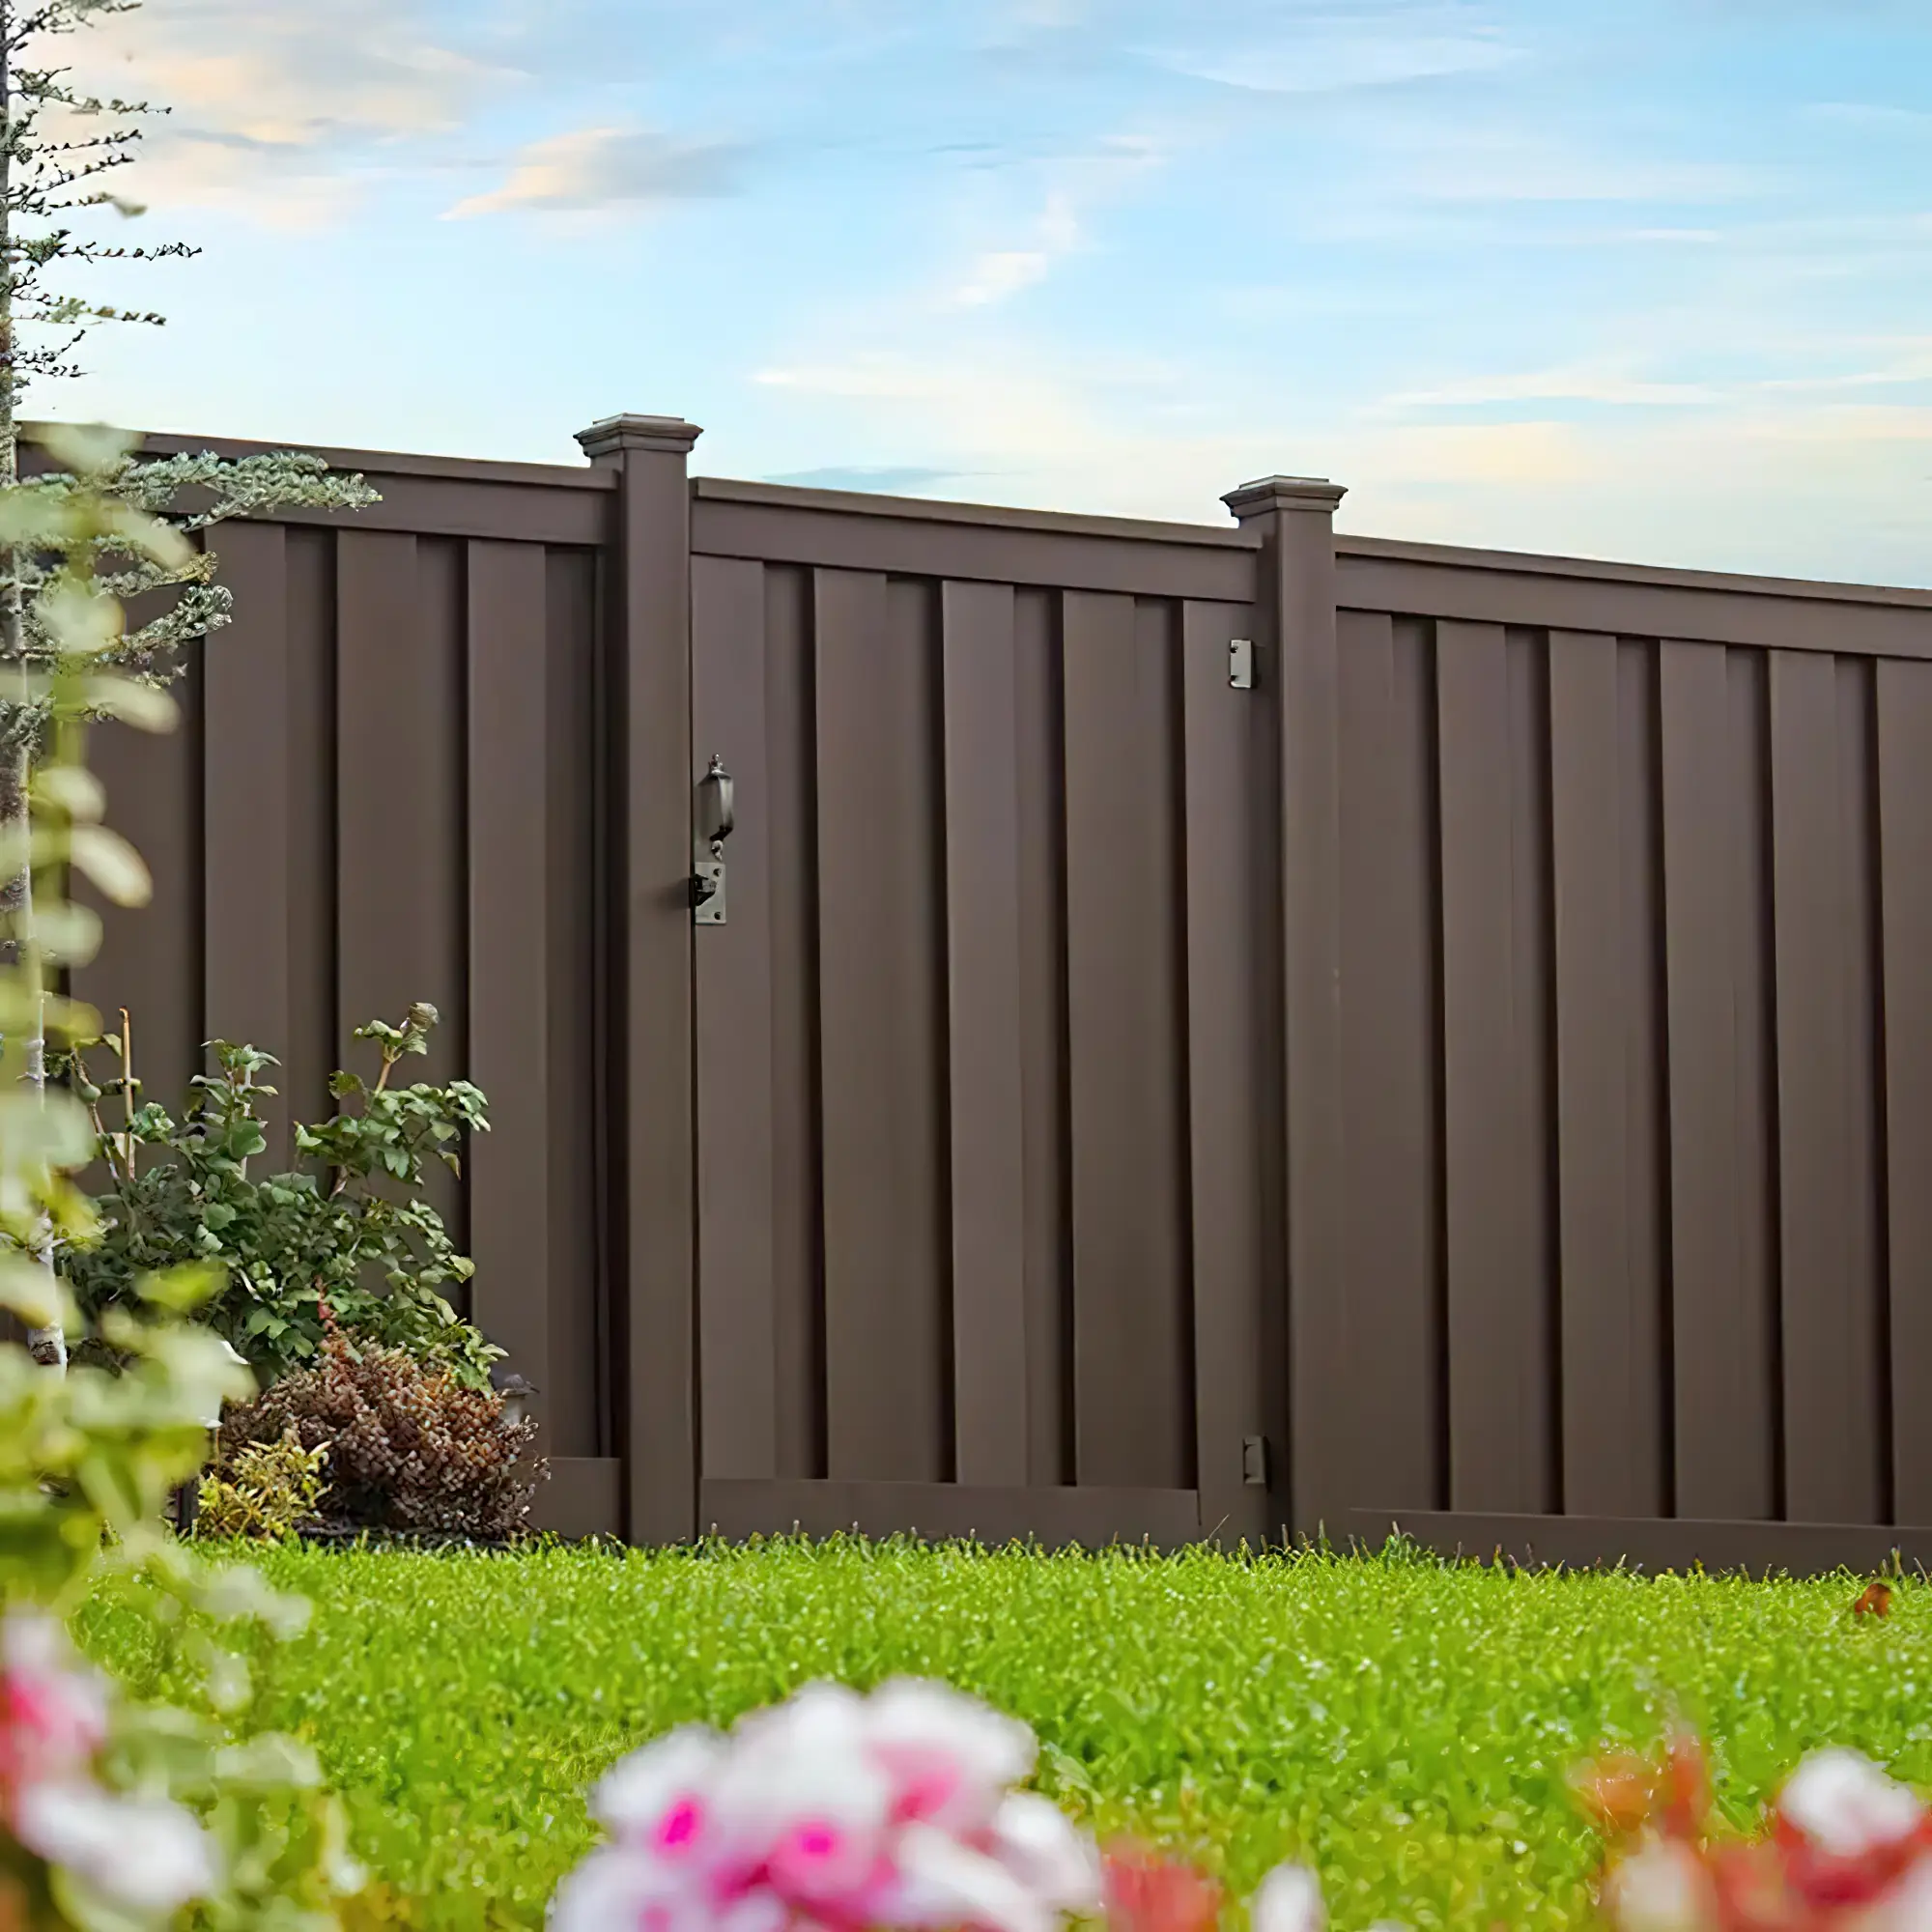 Buy Trex Fencing gates that match the fence.